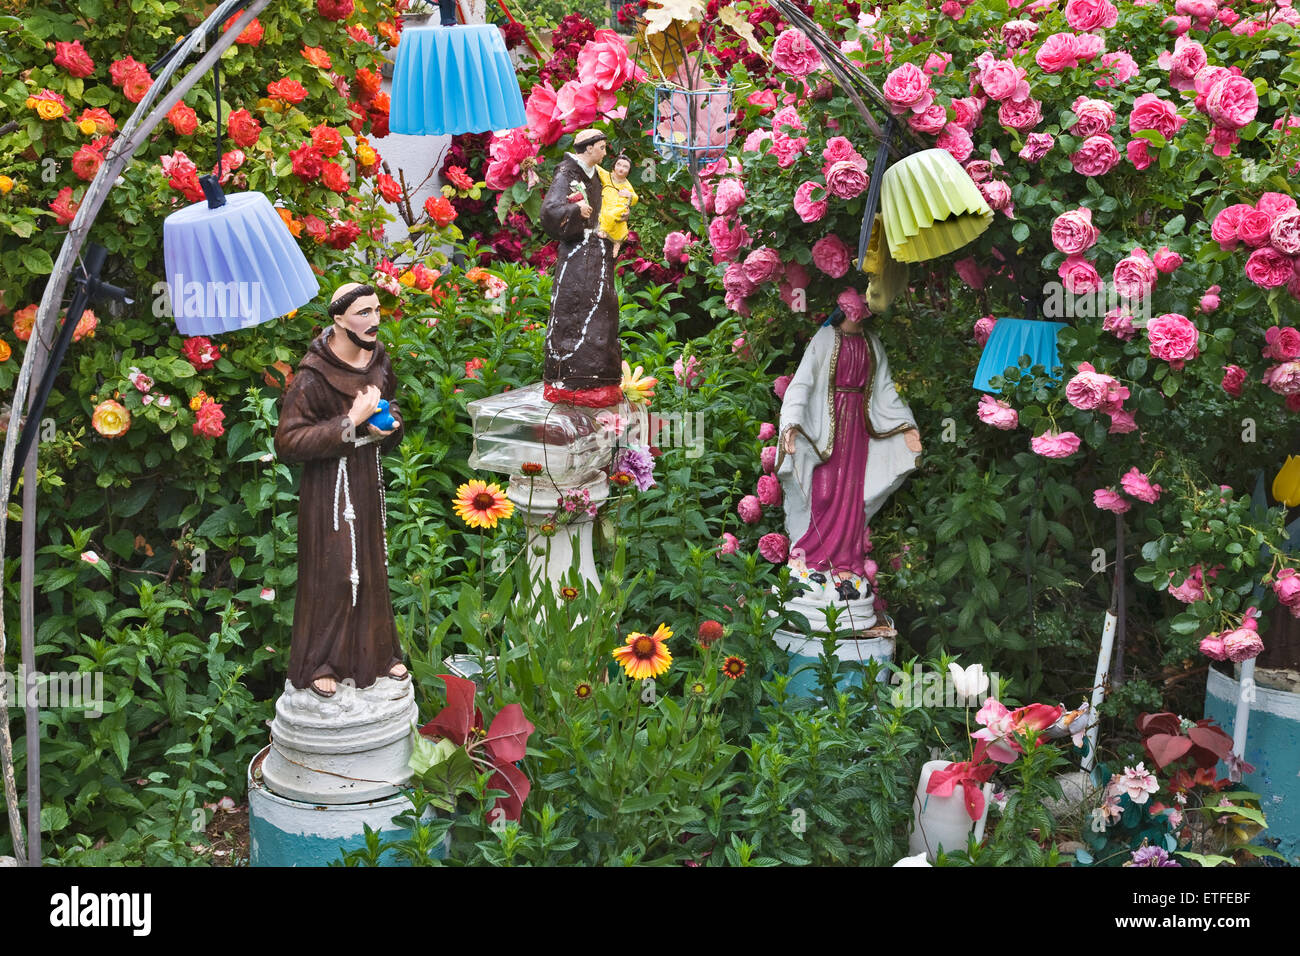 Religious figurines and  June bright June  blooming roses create a quirky but beautiful diorama at the garden of C. L. 'Tunnie'. Stock Photo